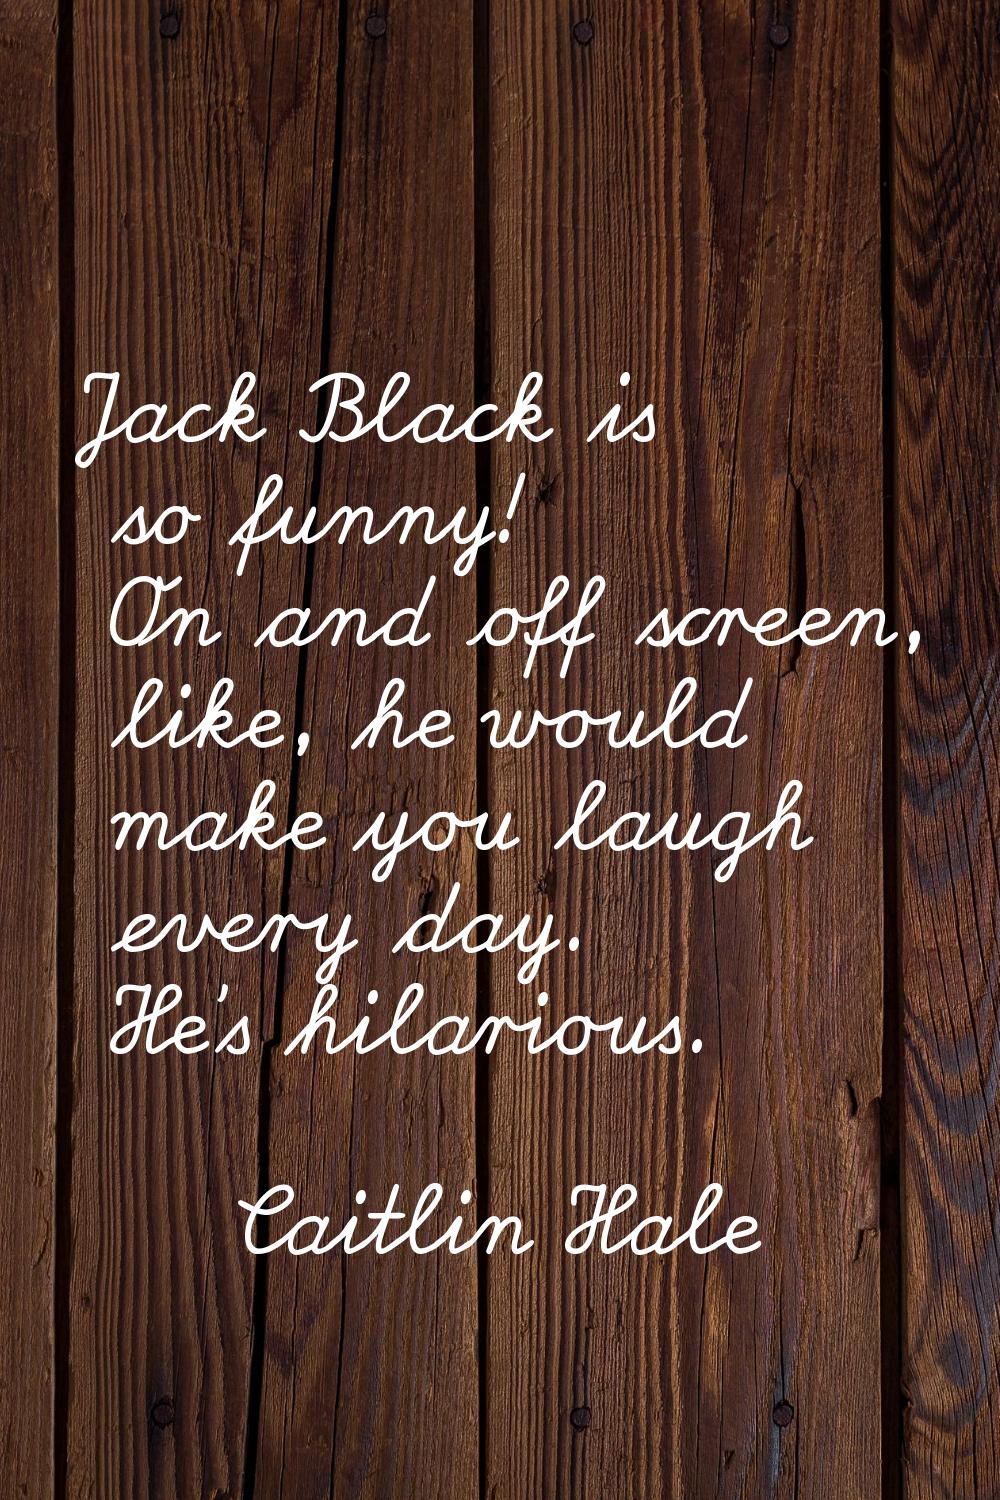 Jack Black is so funny! On and off screen, like, he would make you laugh every day. He's hilarious.